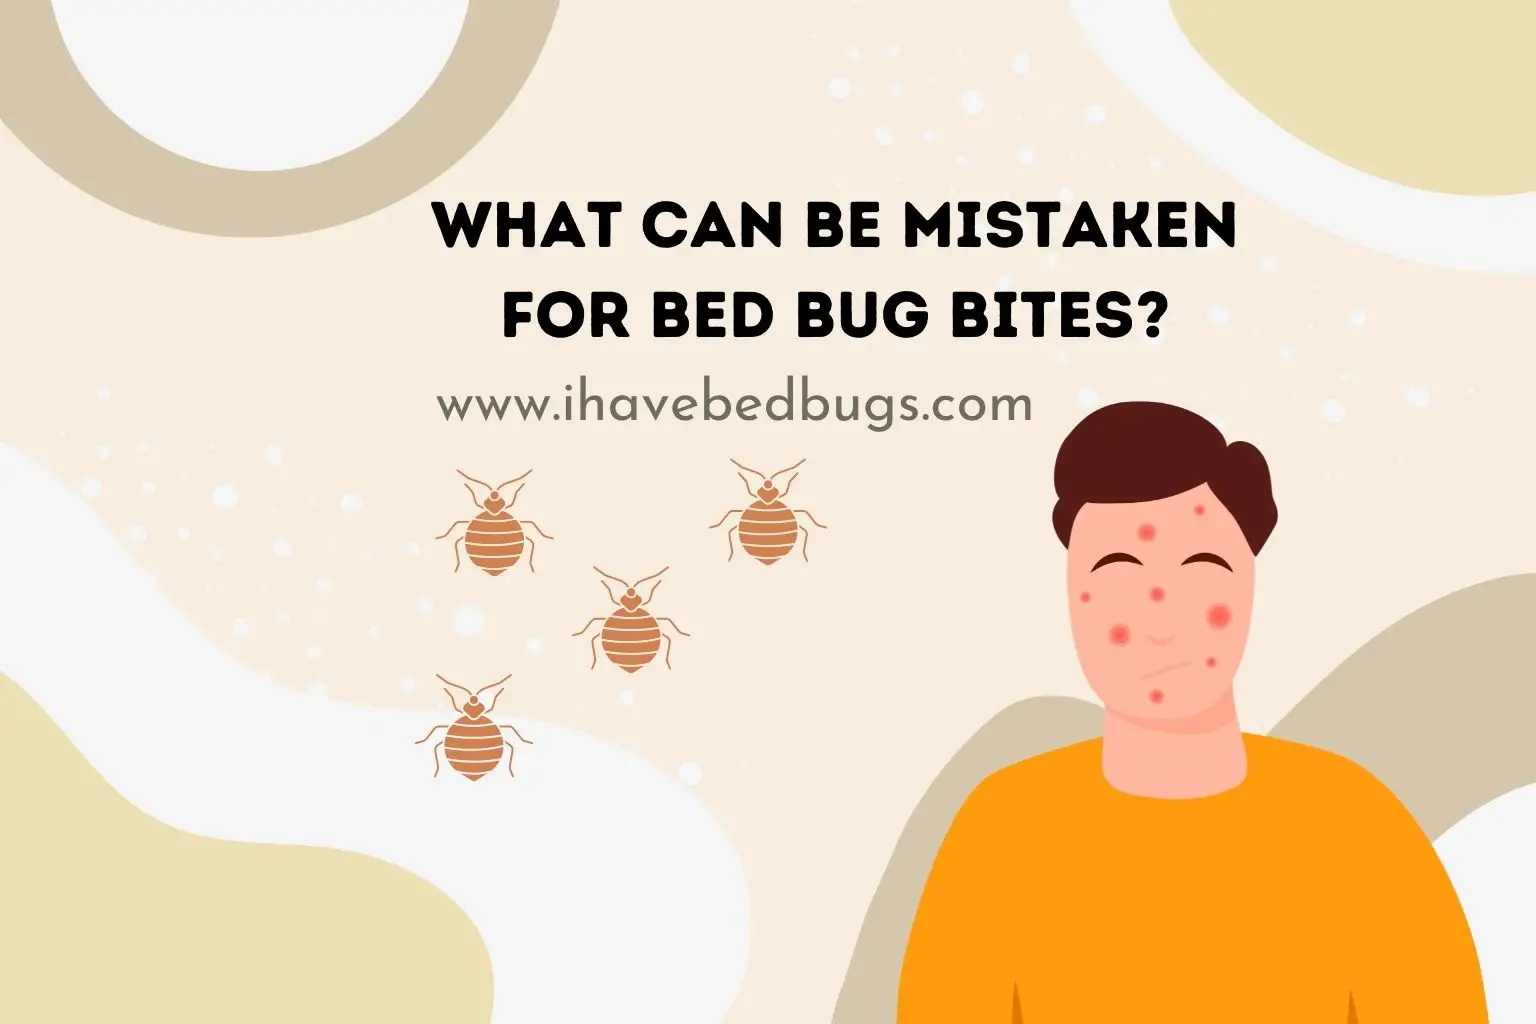 What can be mistaken for bed bug bites